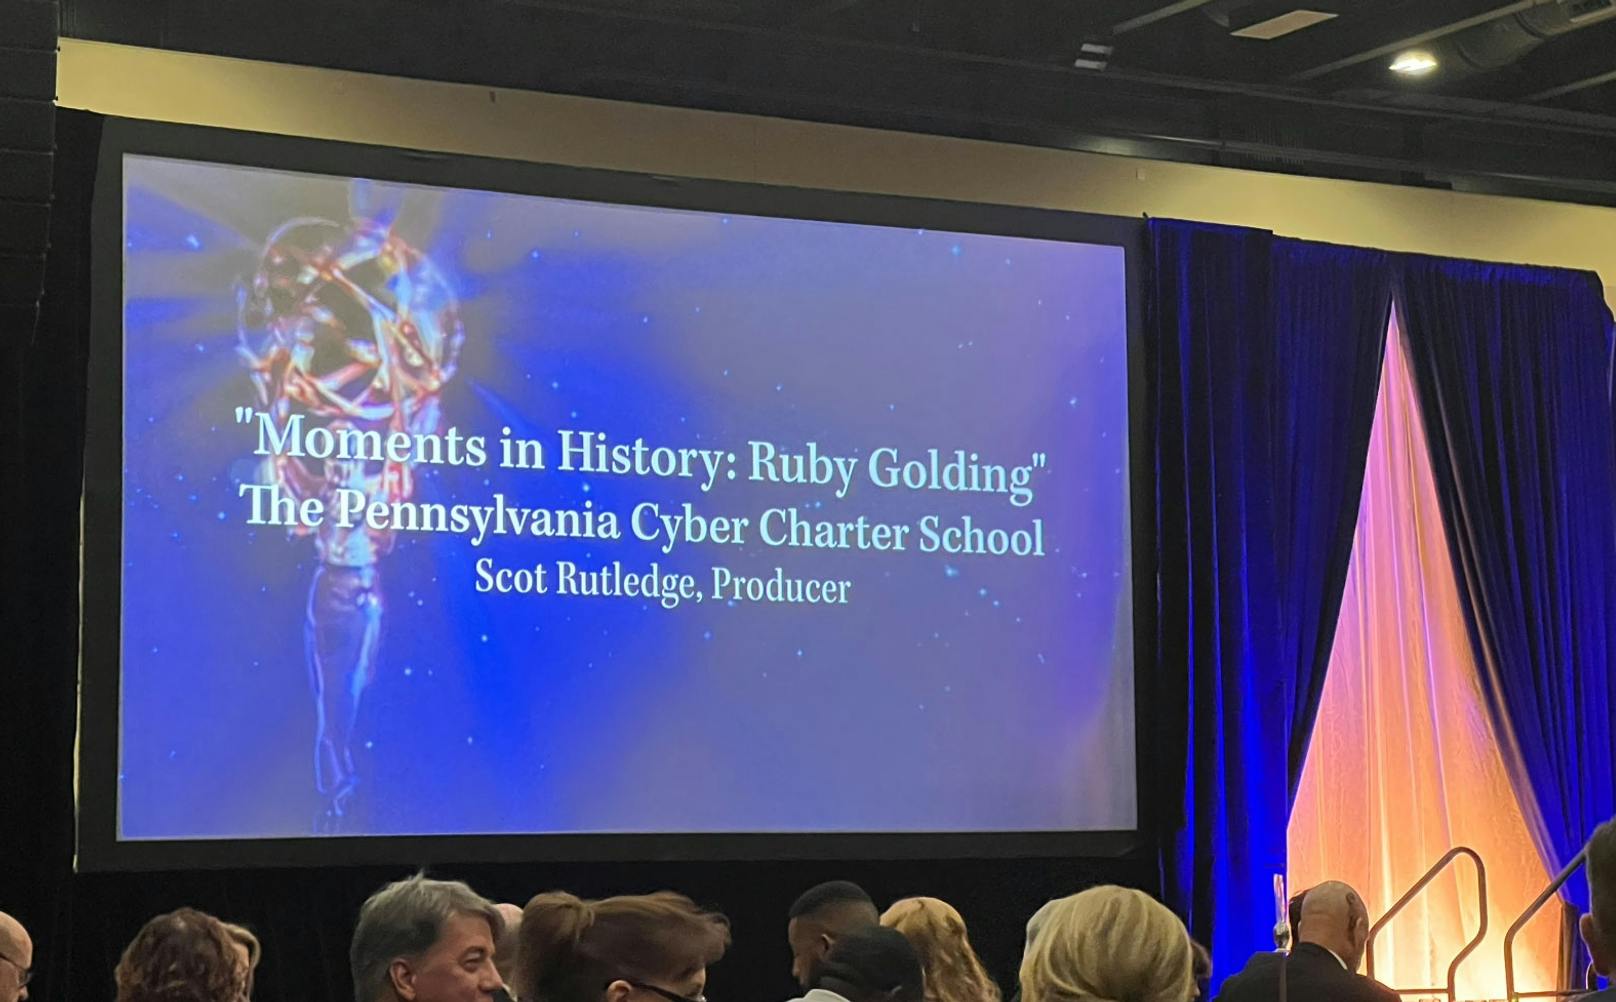 Appearing on the screen at the Mid-Atlantic Regional Emmys: "Moments in History: Ruby Golding," The Pennsylvania Cyber Charter School, Scot Rutledge, Producer